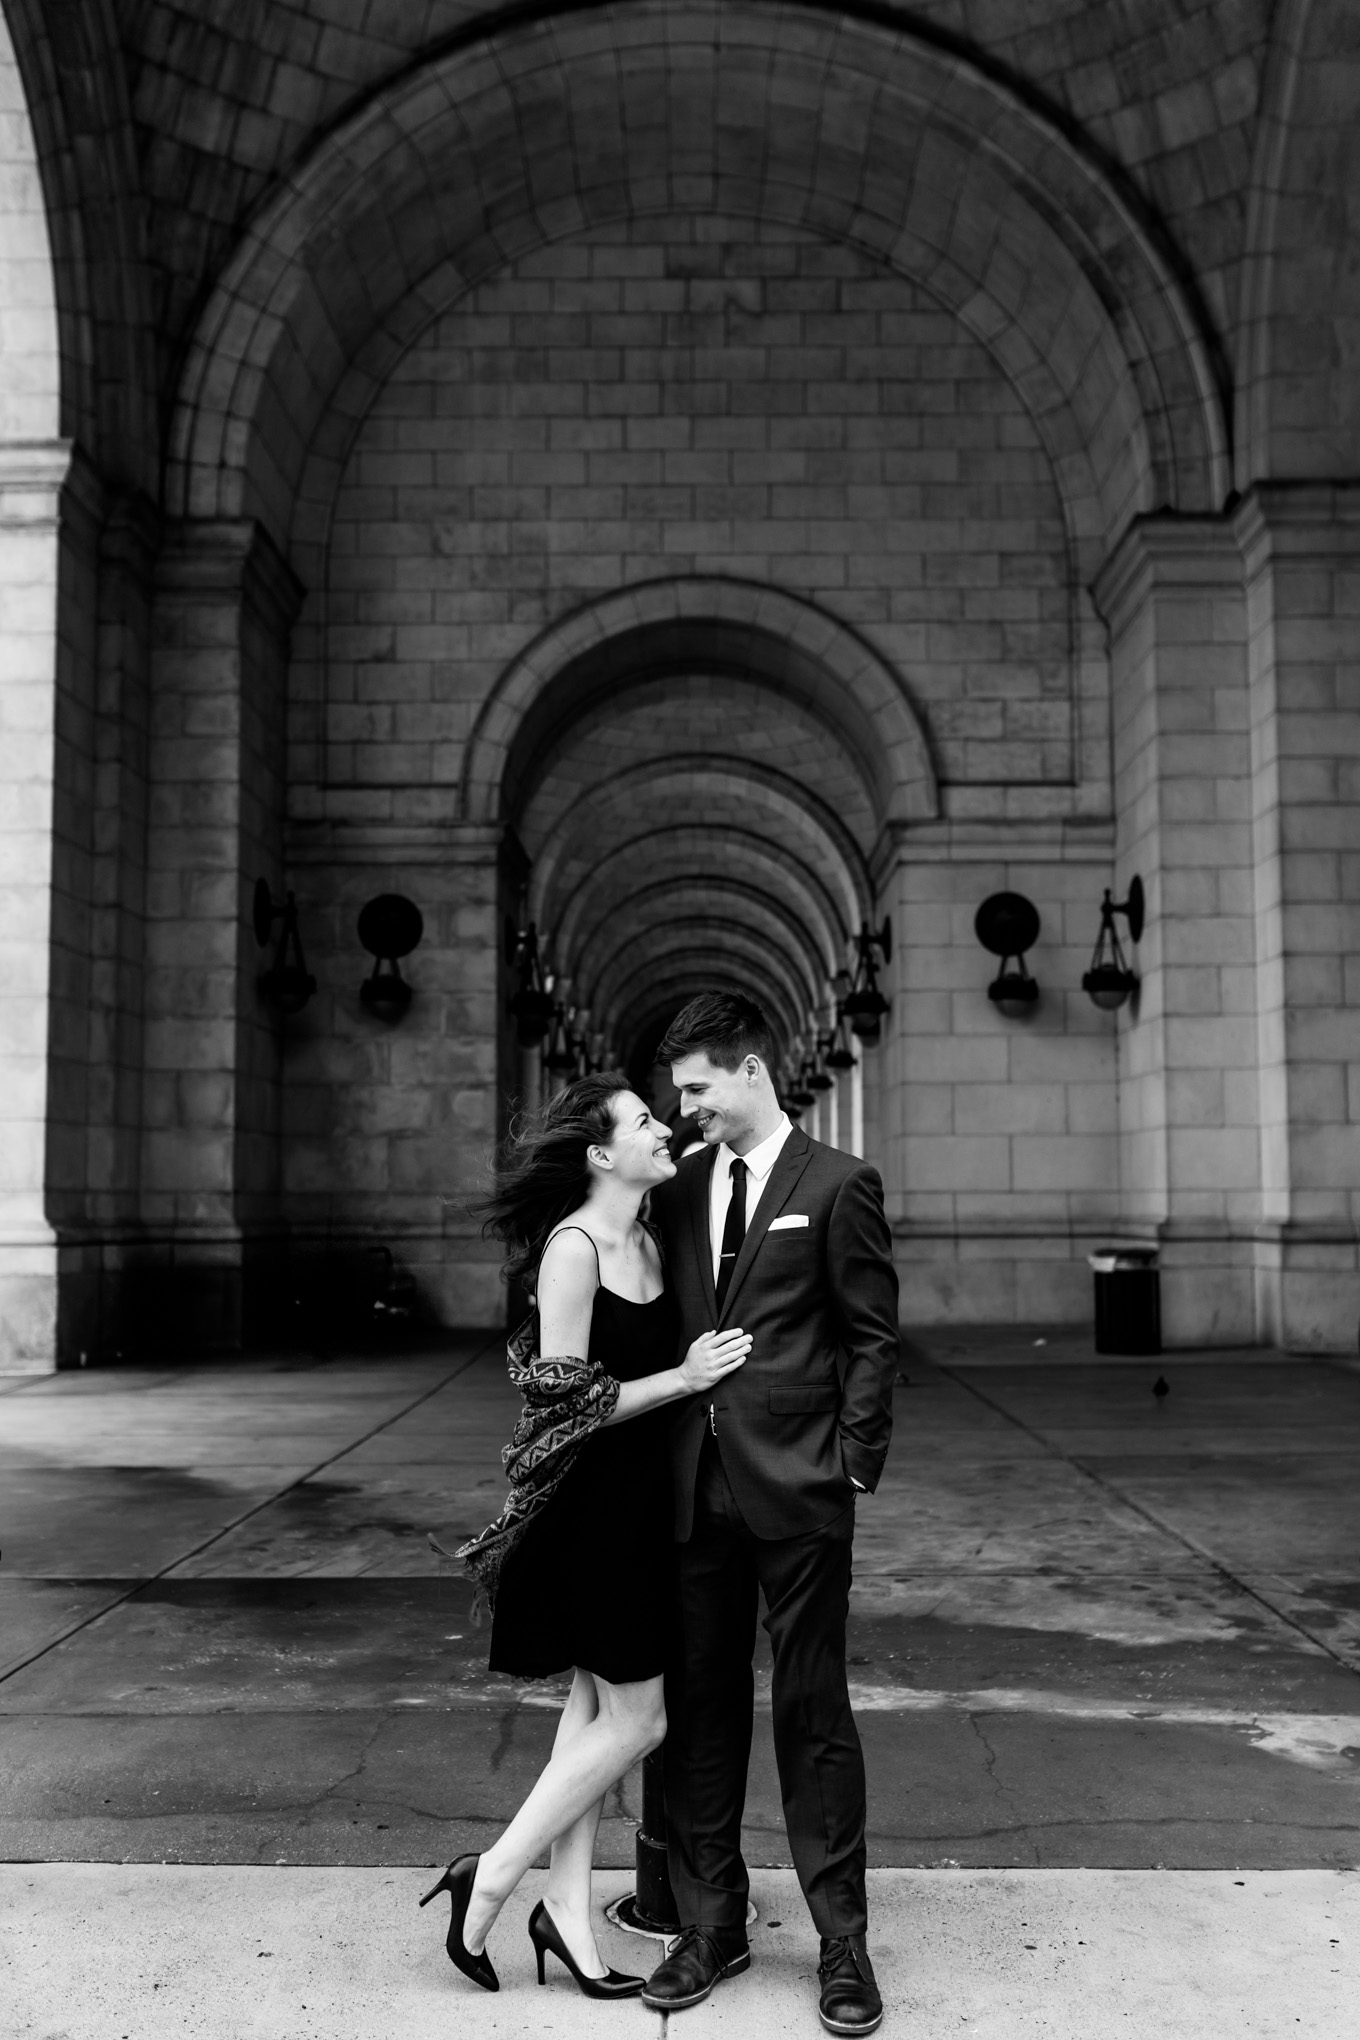 black and white engagement photos, black and white photography, black and white photos, engagement photos, black and white D.C., D.C. engagement photos, classic engagement photos, traditional engagement photos, engagement photos poses, classic architecture, D.C. architecture, Union Station D.C., Union Station, engaged couple, relationship goals, joyful couple, black and white sessions, windblown, romantic portraits, archways